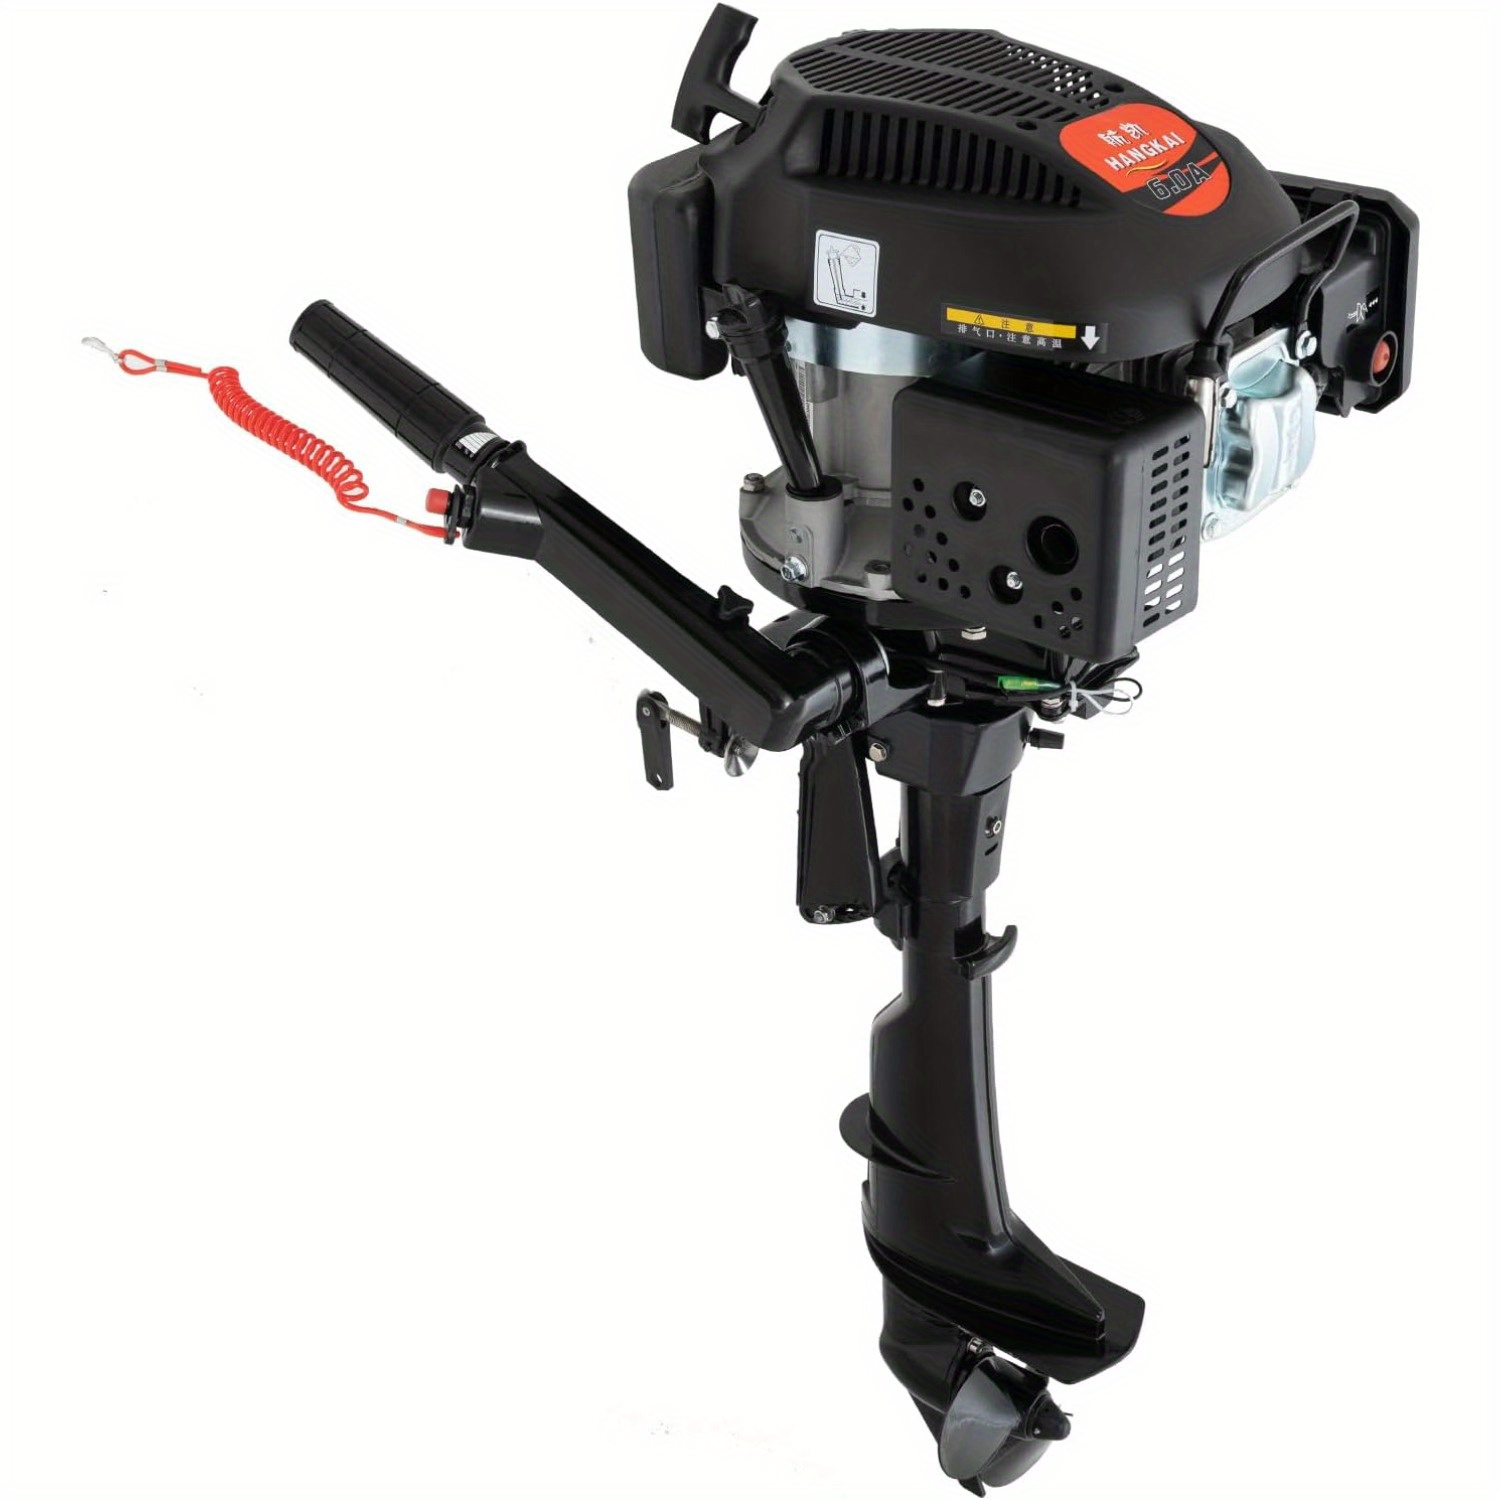 

4 Stroke 6hp Heavy Duty Boat Motor Outboard Motor Boat Engine With Air Cooling System